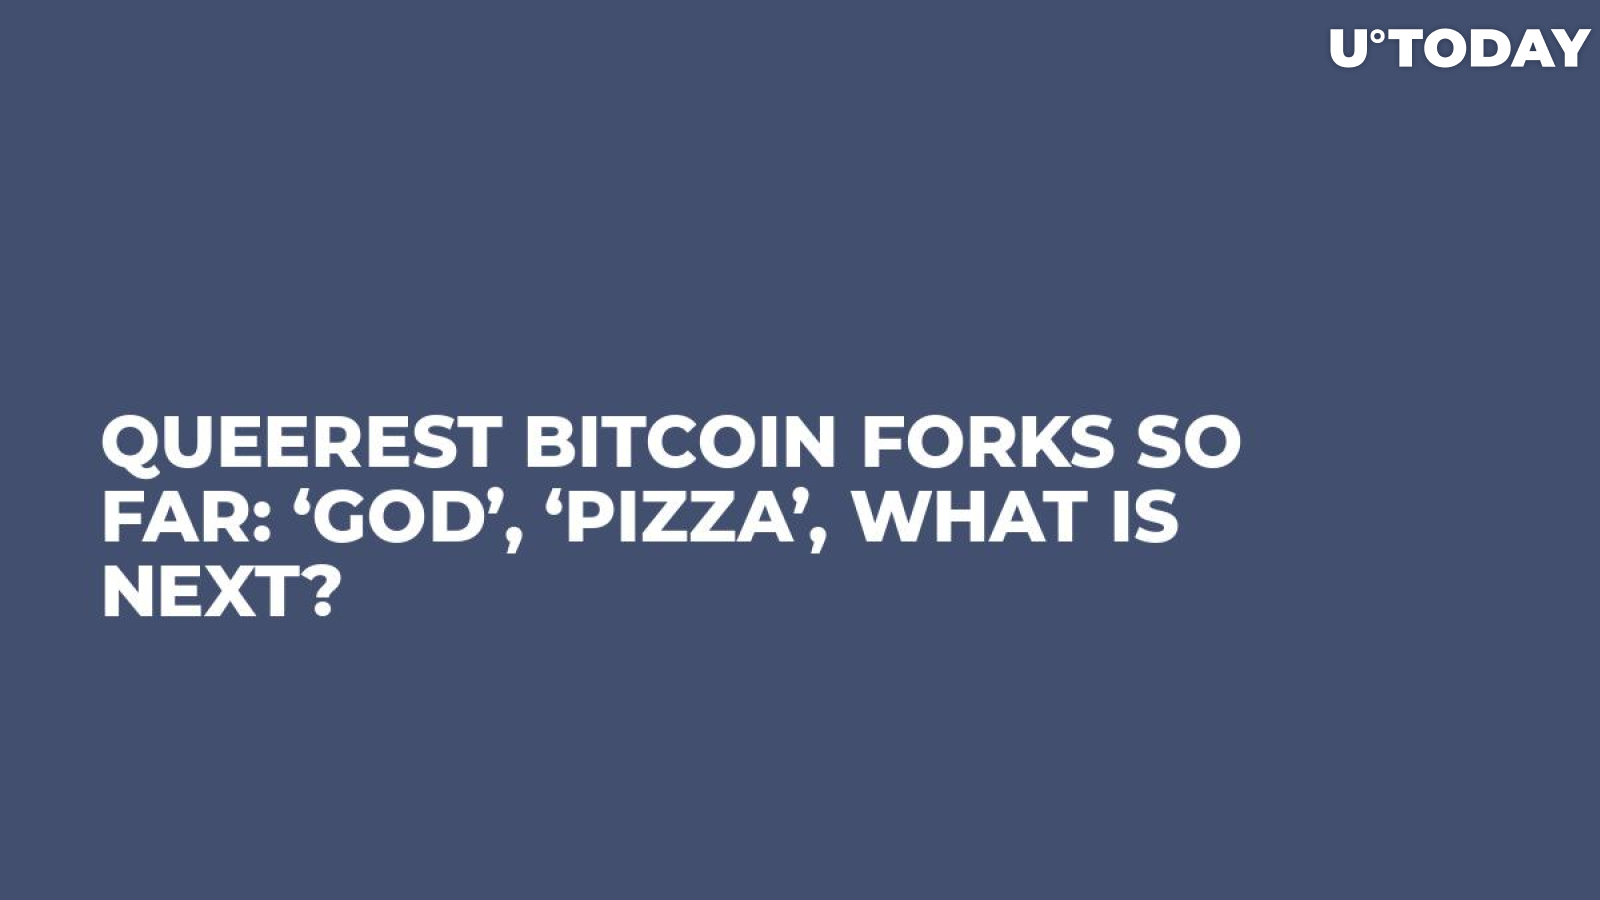 Queerest Bitcoin Forks So Far: ‘God’, ‘Pizza’, What Is Next?